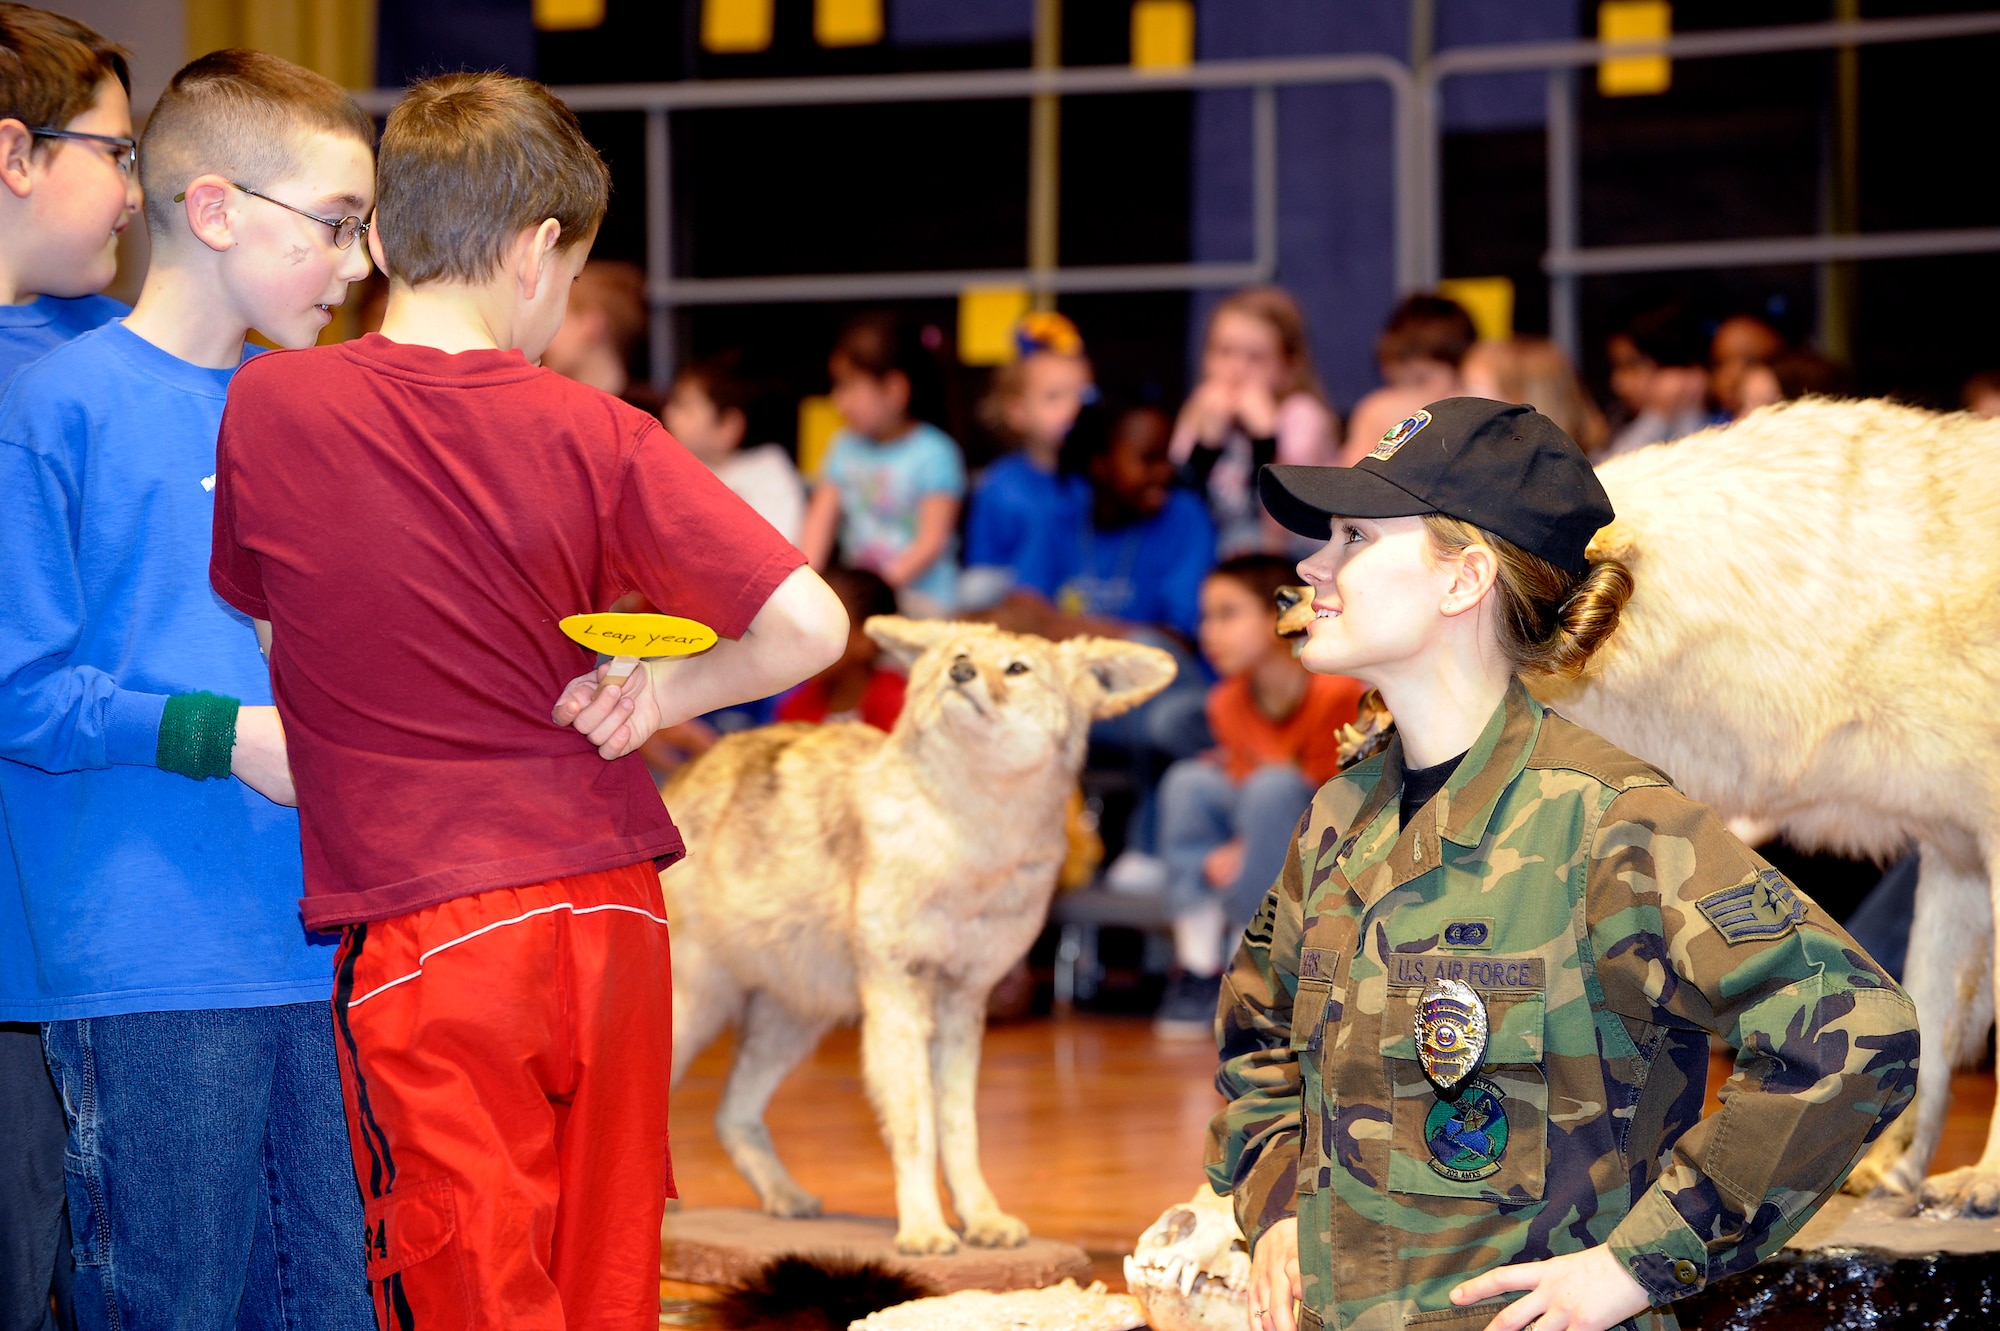 Staff Sgt. Sabriena Childers discusses wildlife safety with grade school students at Aurora Elementary Feb. 15 during a school assembly. Sergeant Childers is a Military Conservation Agent and took the opportunity to remind the children to avoid putting themselves into situations where they could get hurt by moose, bears and wolves that frequently reside at Elmendorf. The Base Wildlife office is currently accepting applications for Military Conservation Agents. All active-duty Air Force members of all ranks and career fi elds can apply. For more information, call
Tech. Sgt. Jason Lingenfelter at 552-3917. (U.S. Air Force photo by Master Sgt. Keith Brown)